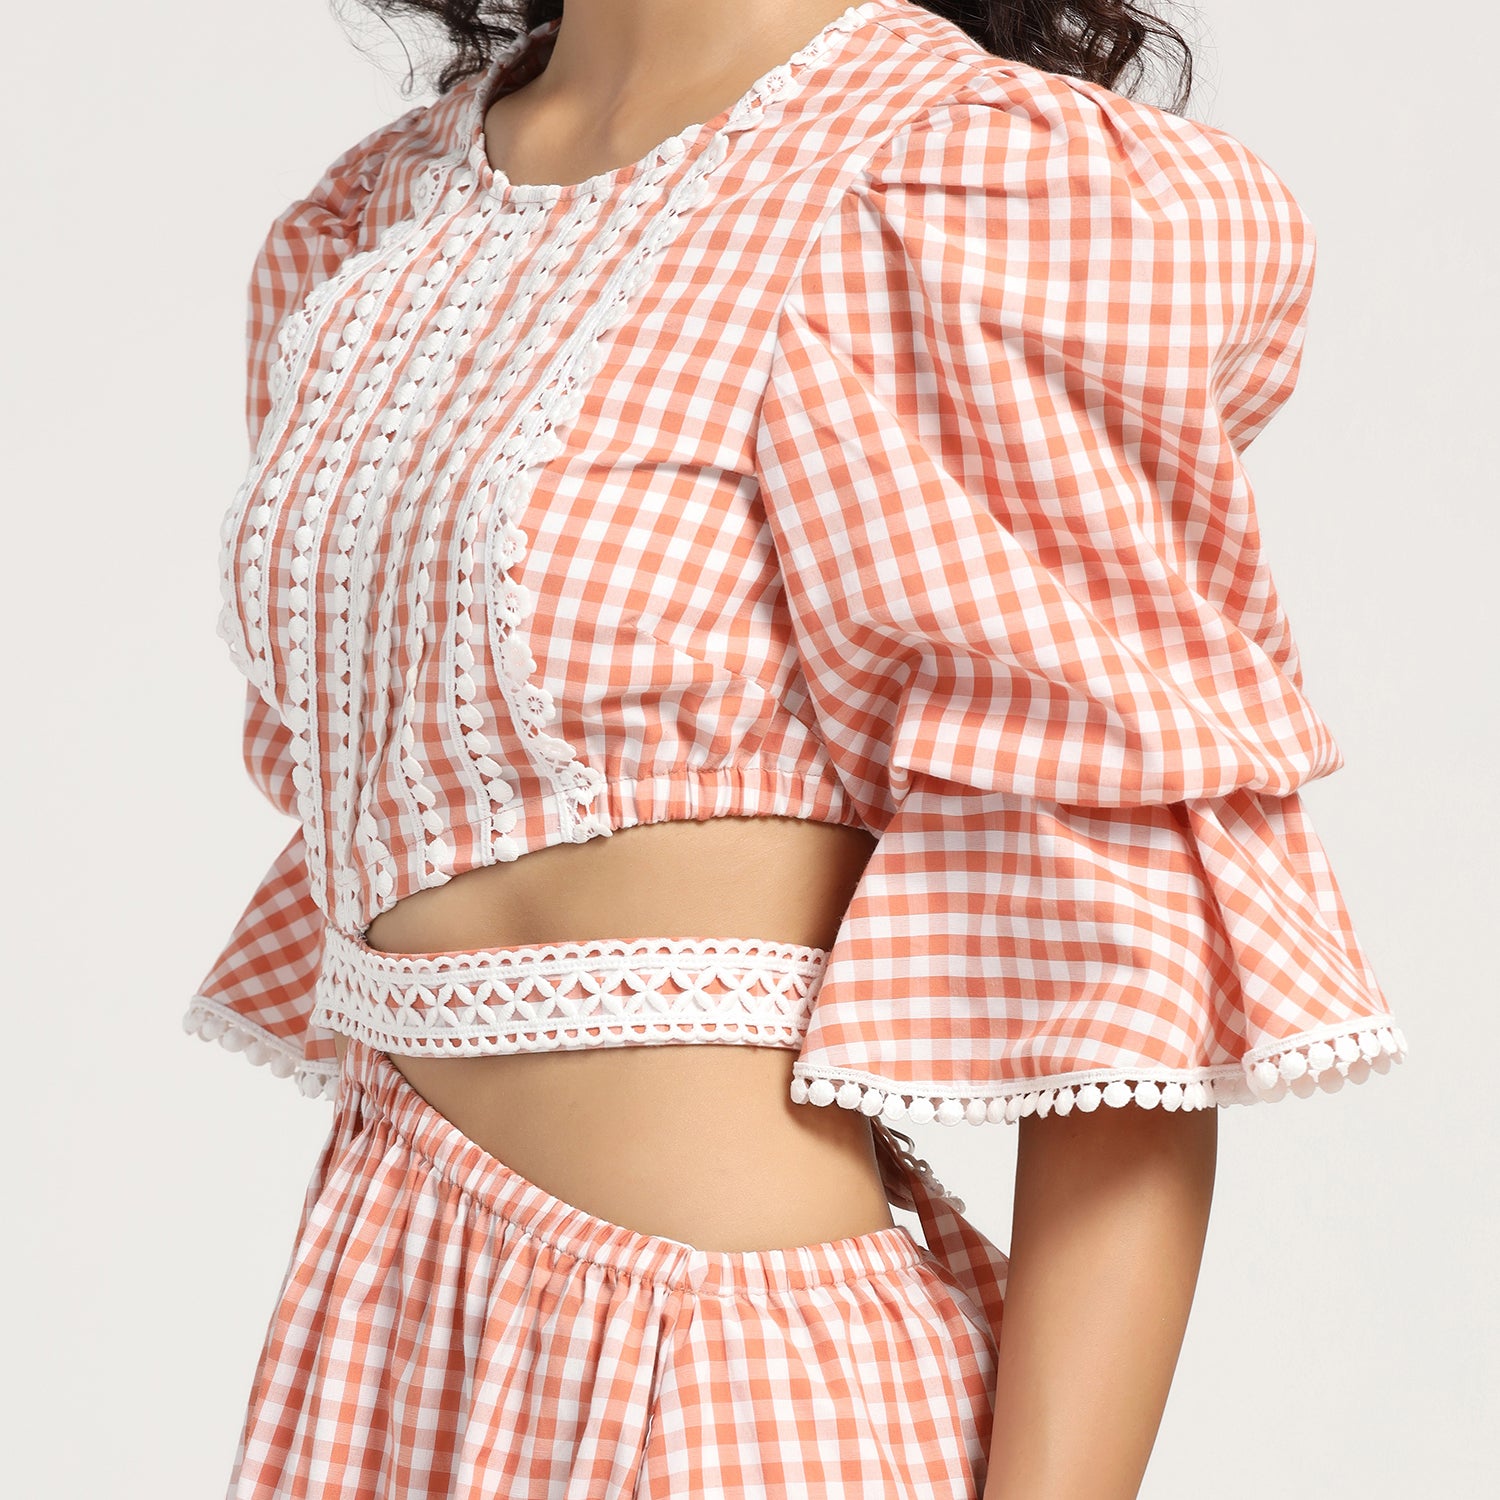 Peach Check Dress With Lace Yoke & Tie Blet